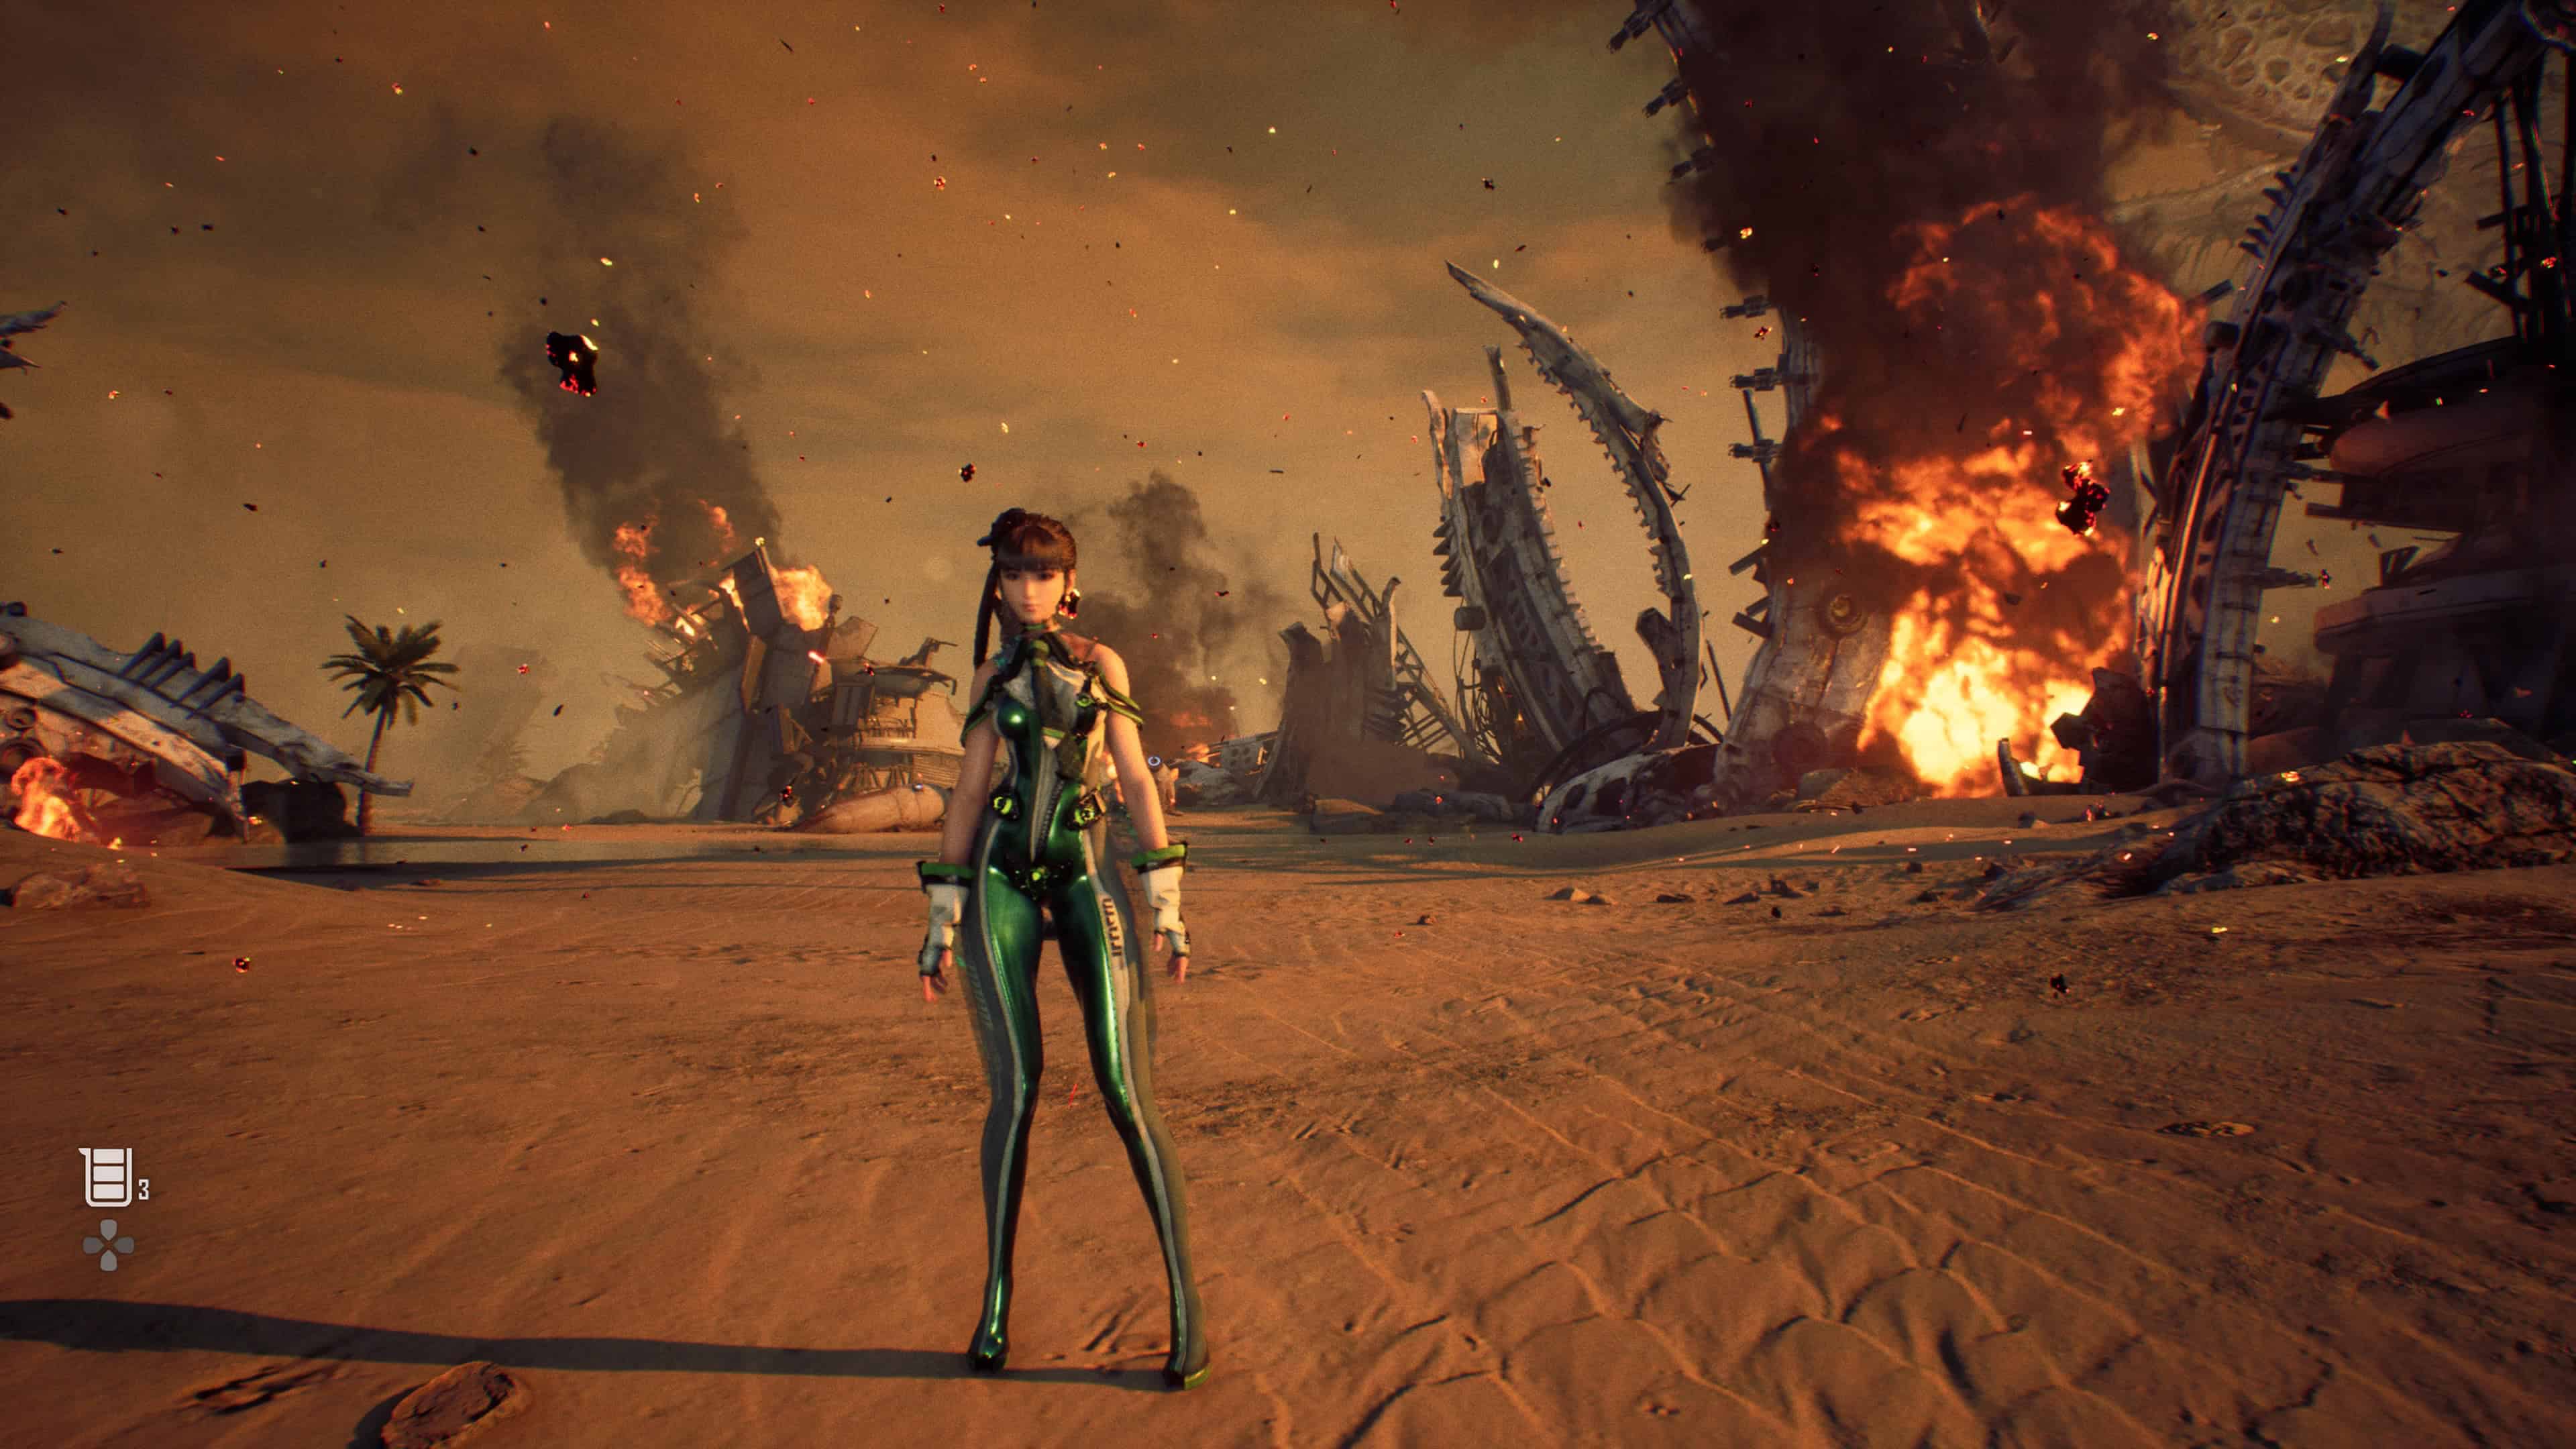 Stellar Blade difficulty: EVE stands in a desert area in the demo.